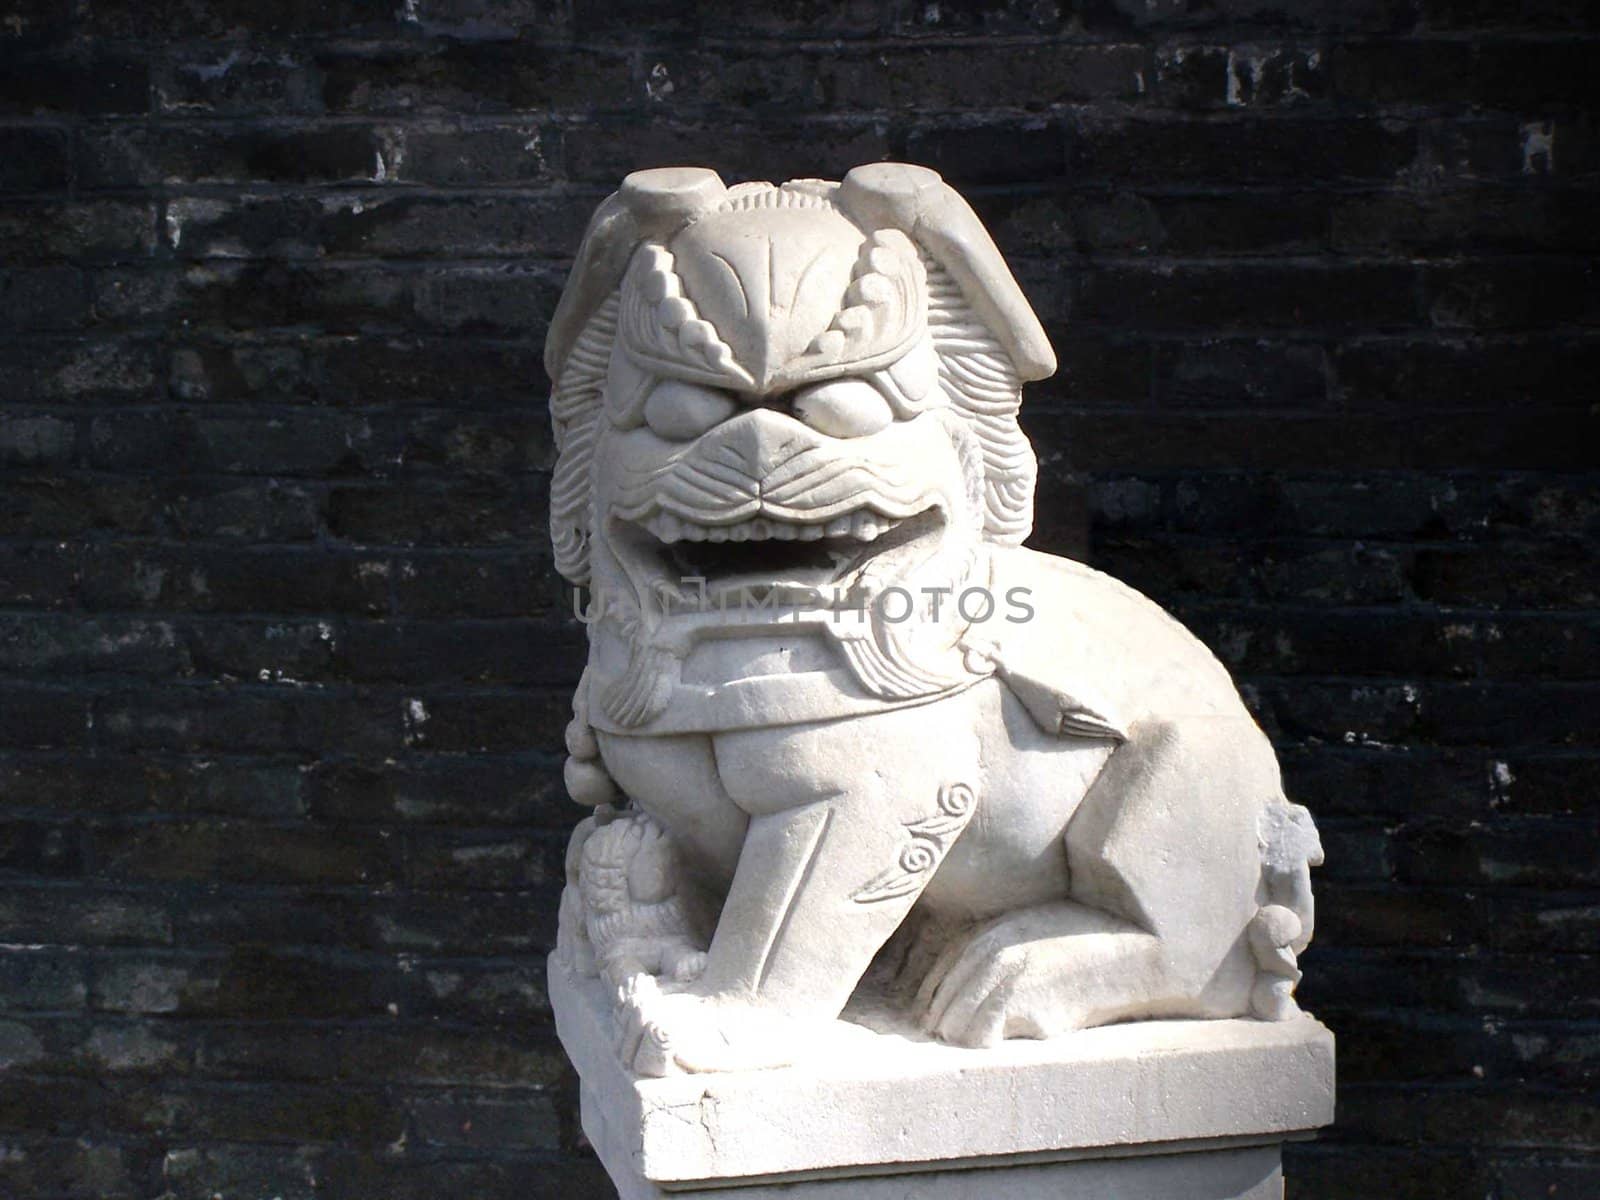 China. Old residence of the king. A dragon